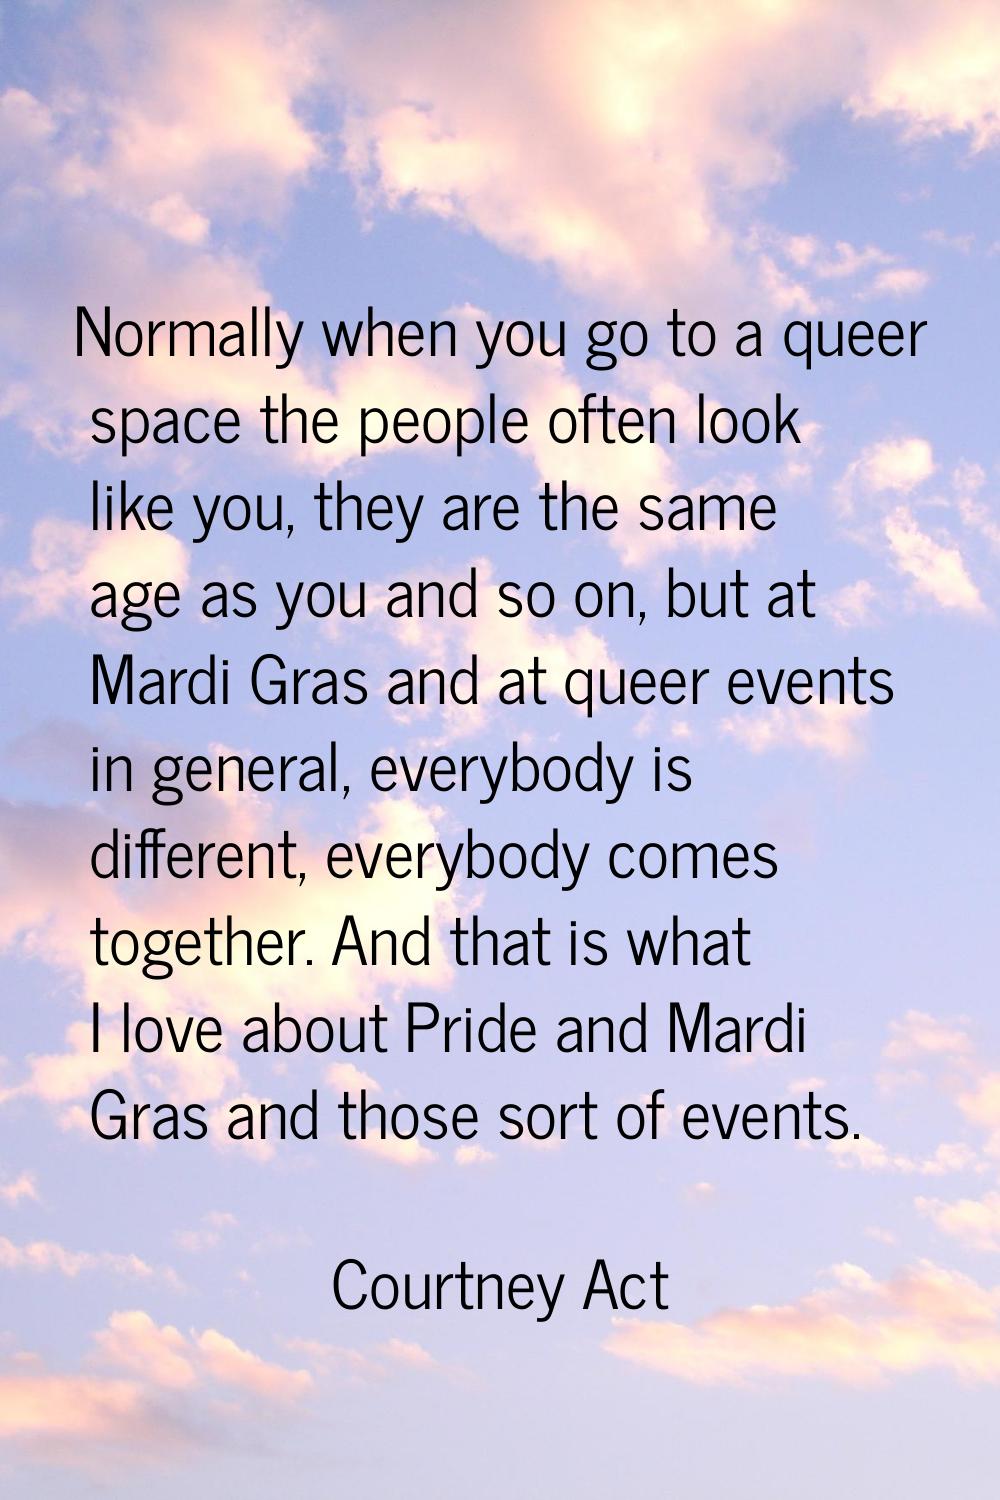 Normally when you go to a queer space the people often look like you, they are the same age as you 